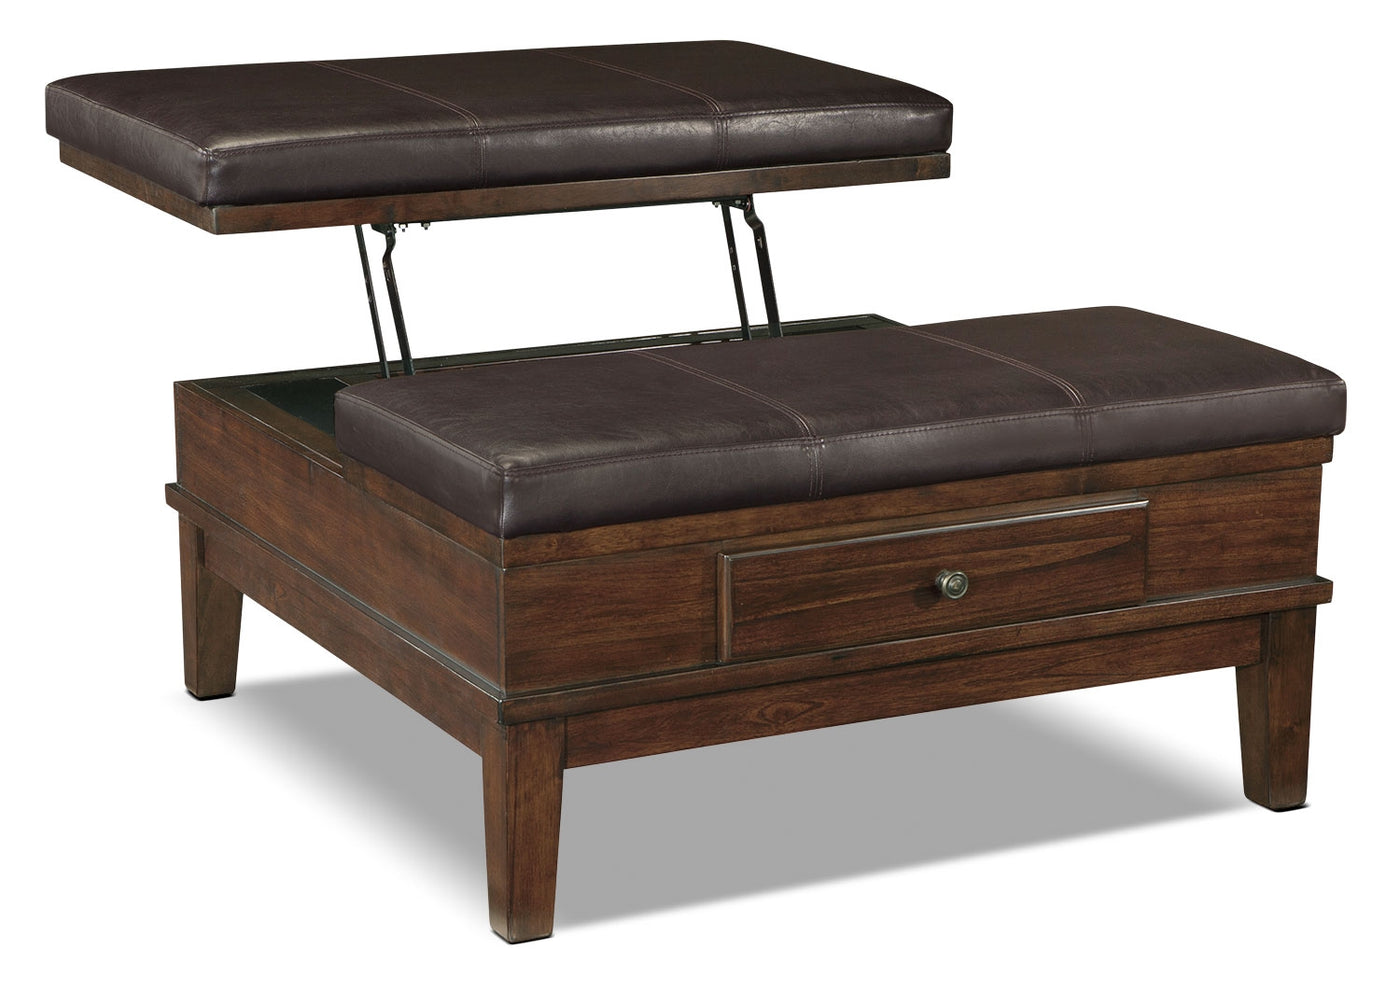 Gately Ottoman Coffee Table With Lift Top The Brick